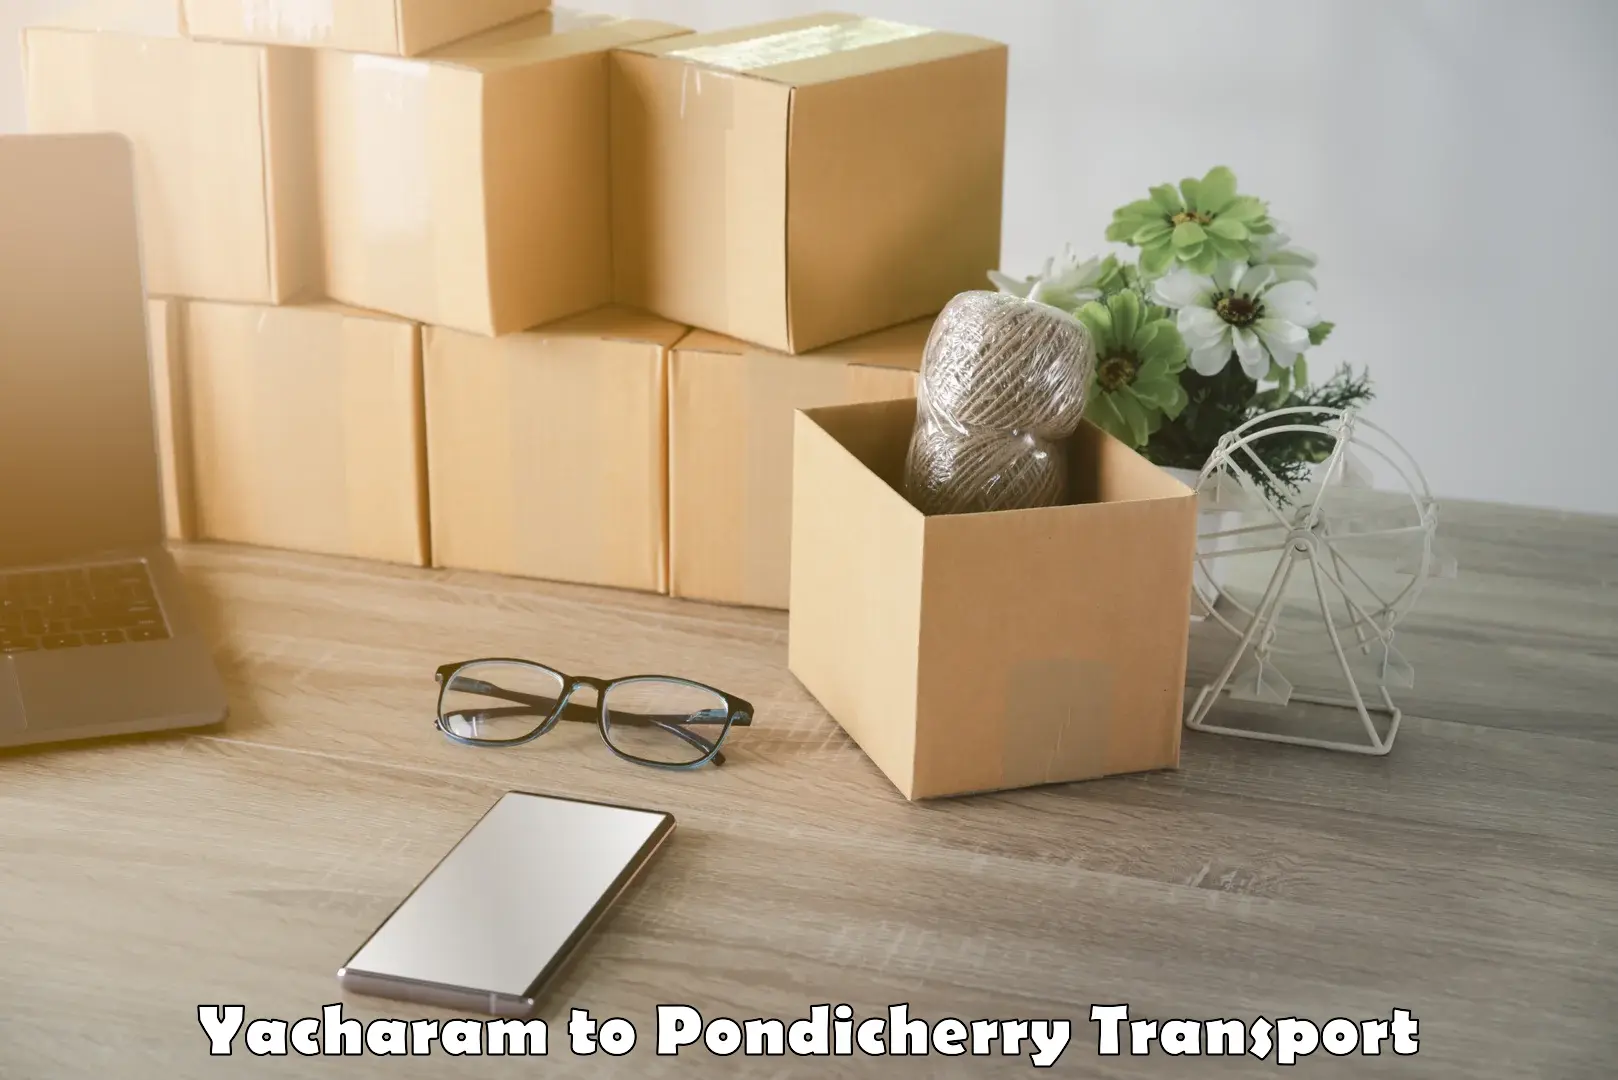 Material transport services Yacharam to Pondicherry